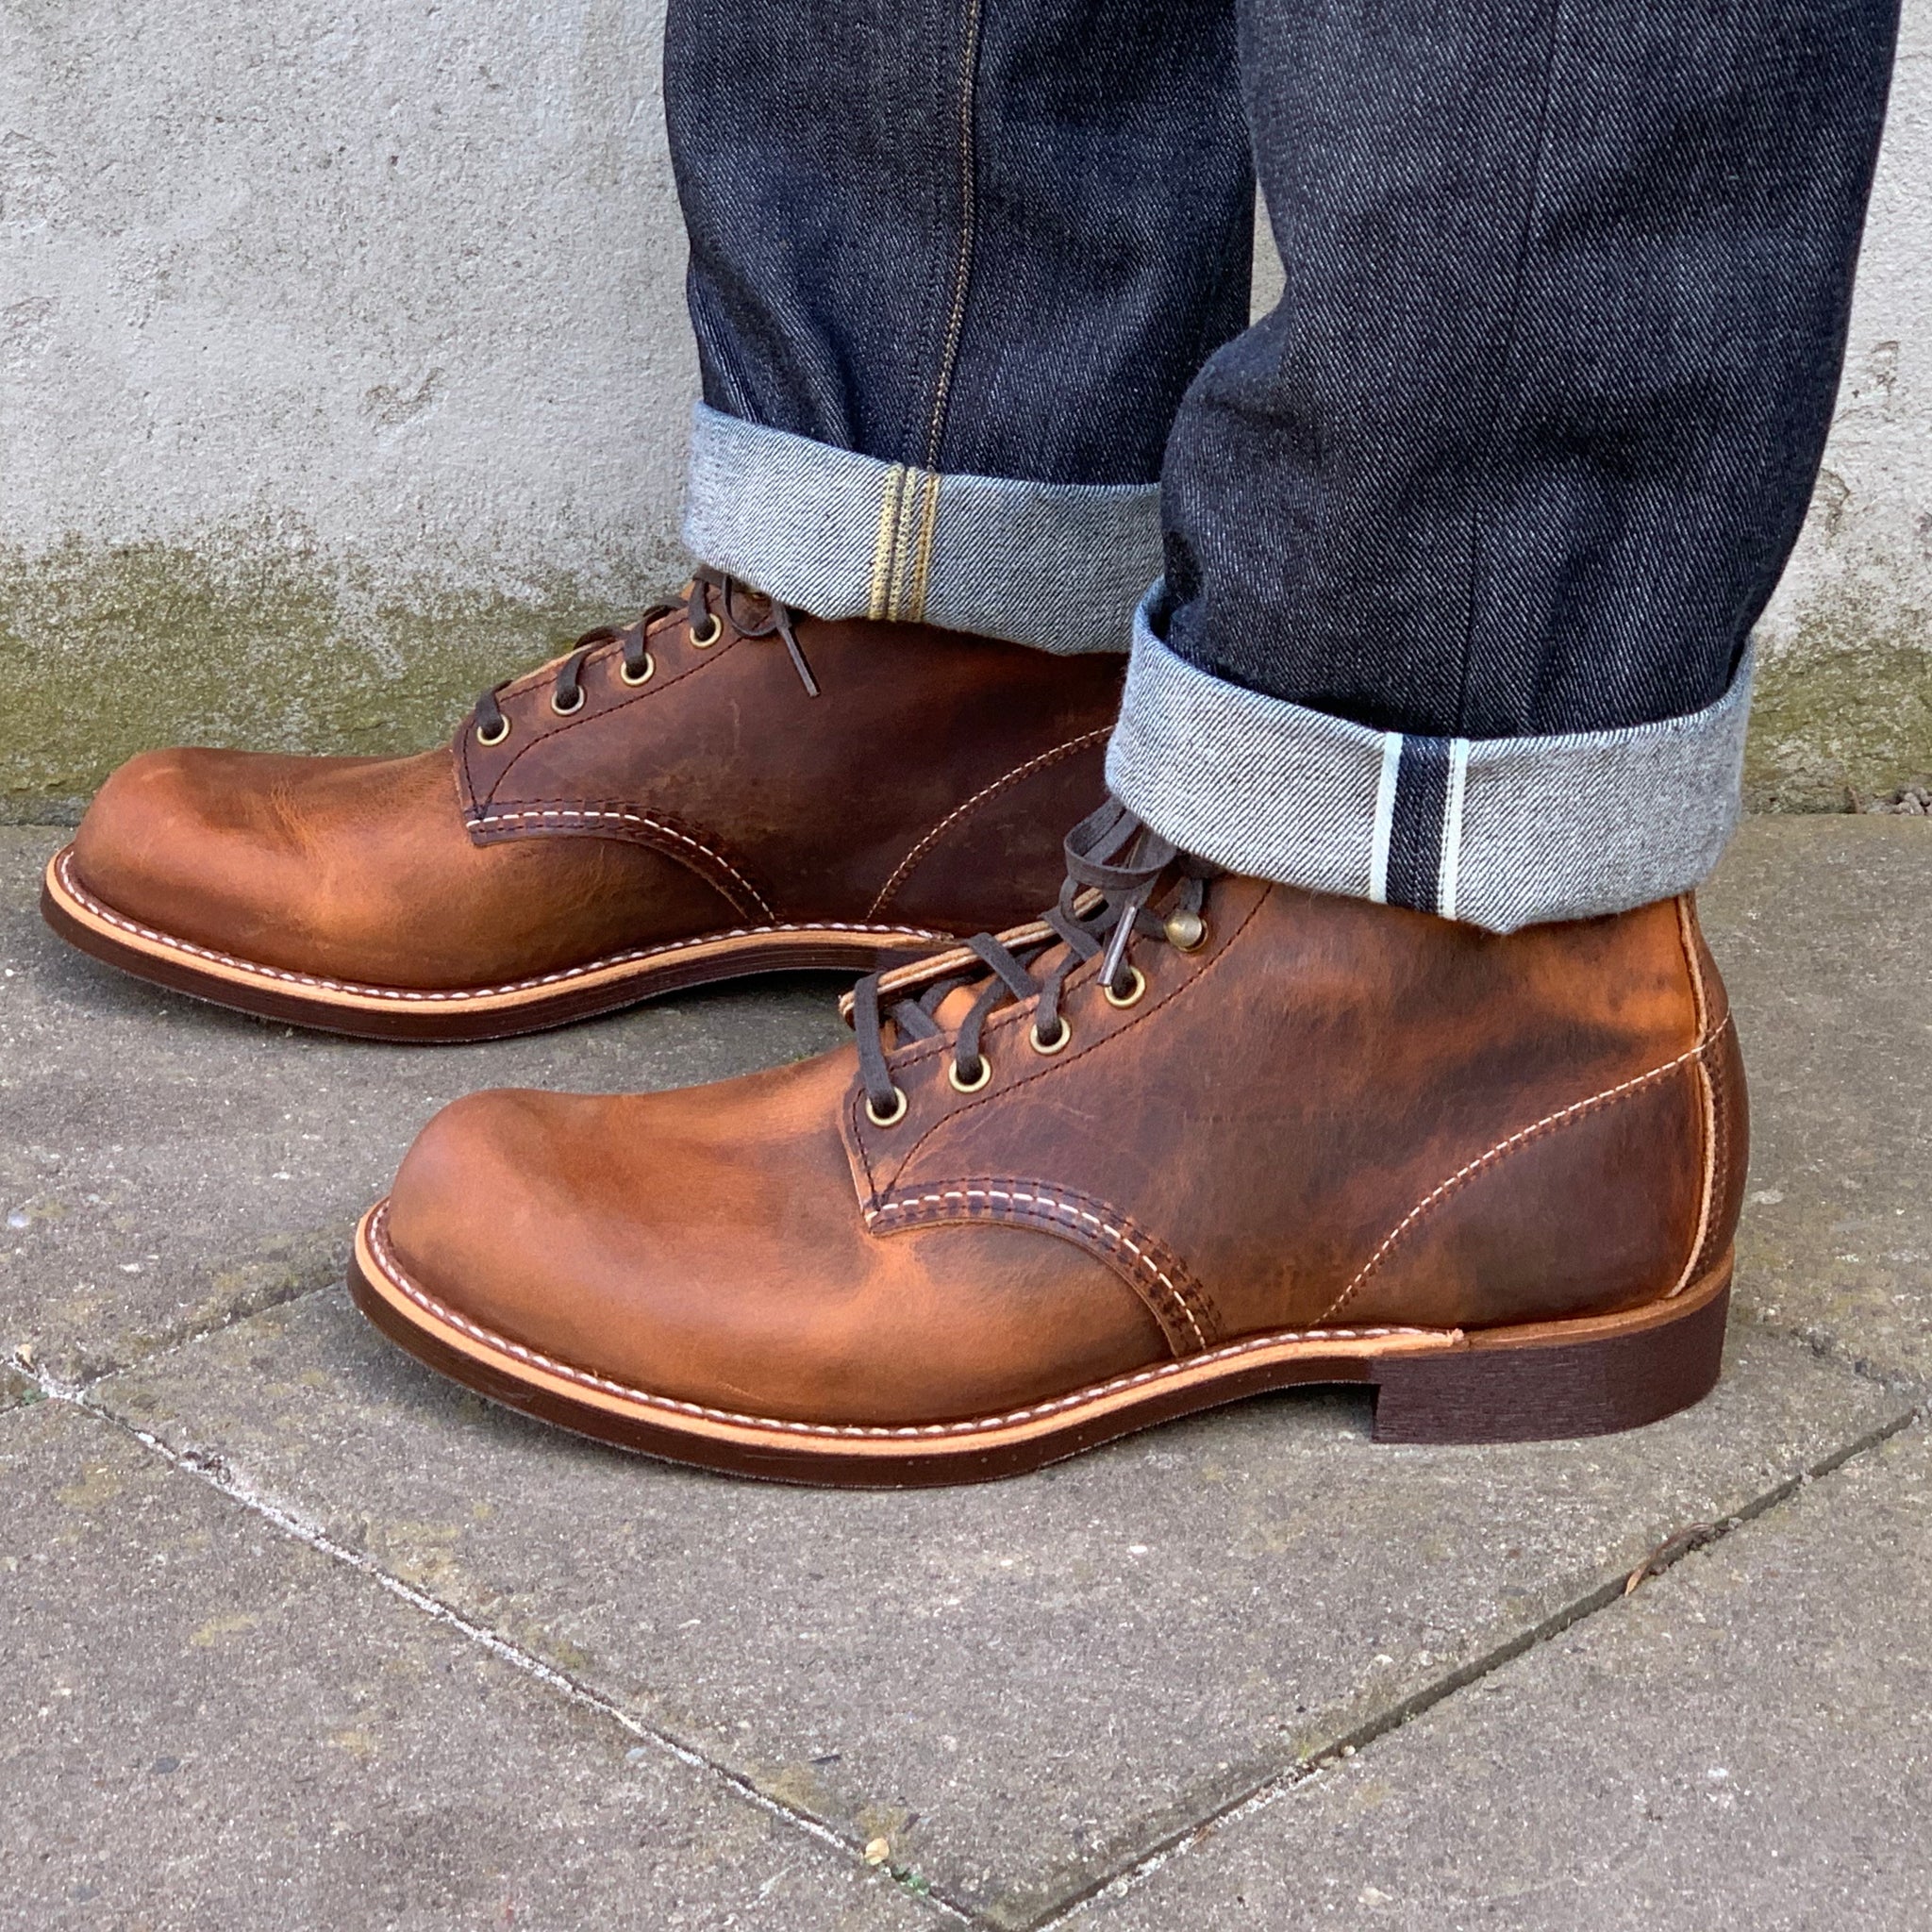 Red Wing - 3343 - Blacksmith (Copper Rough & Tough) - Brund